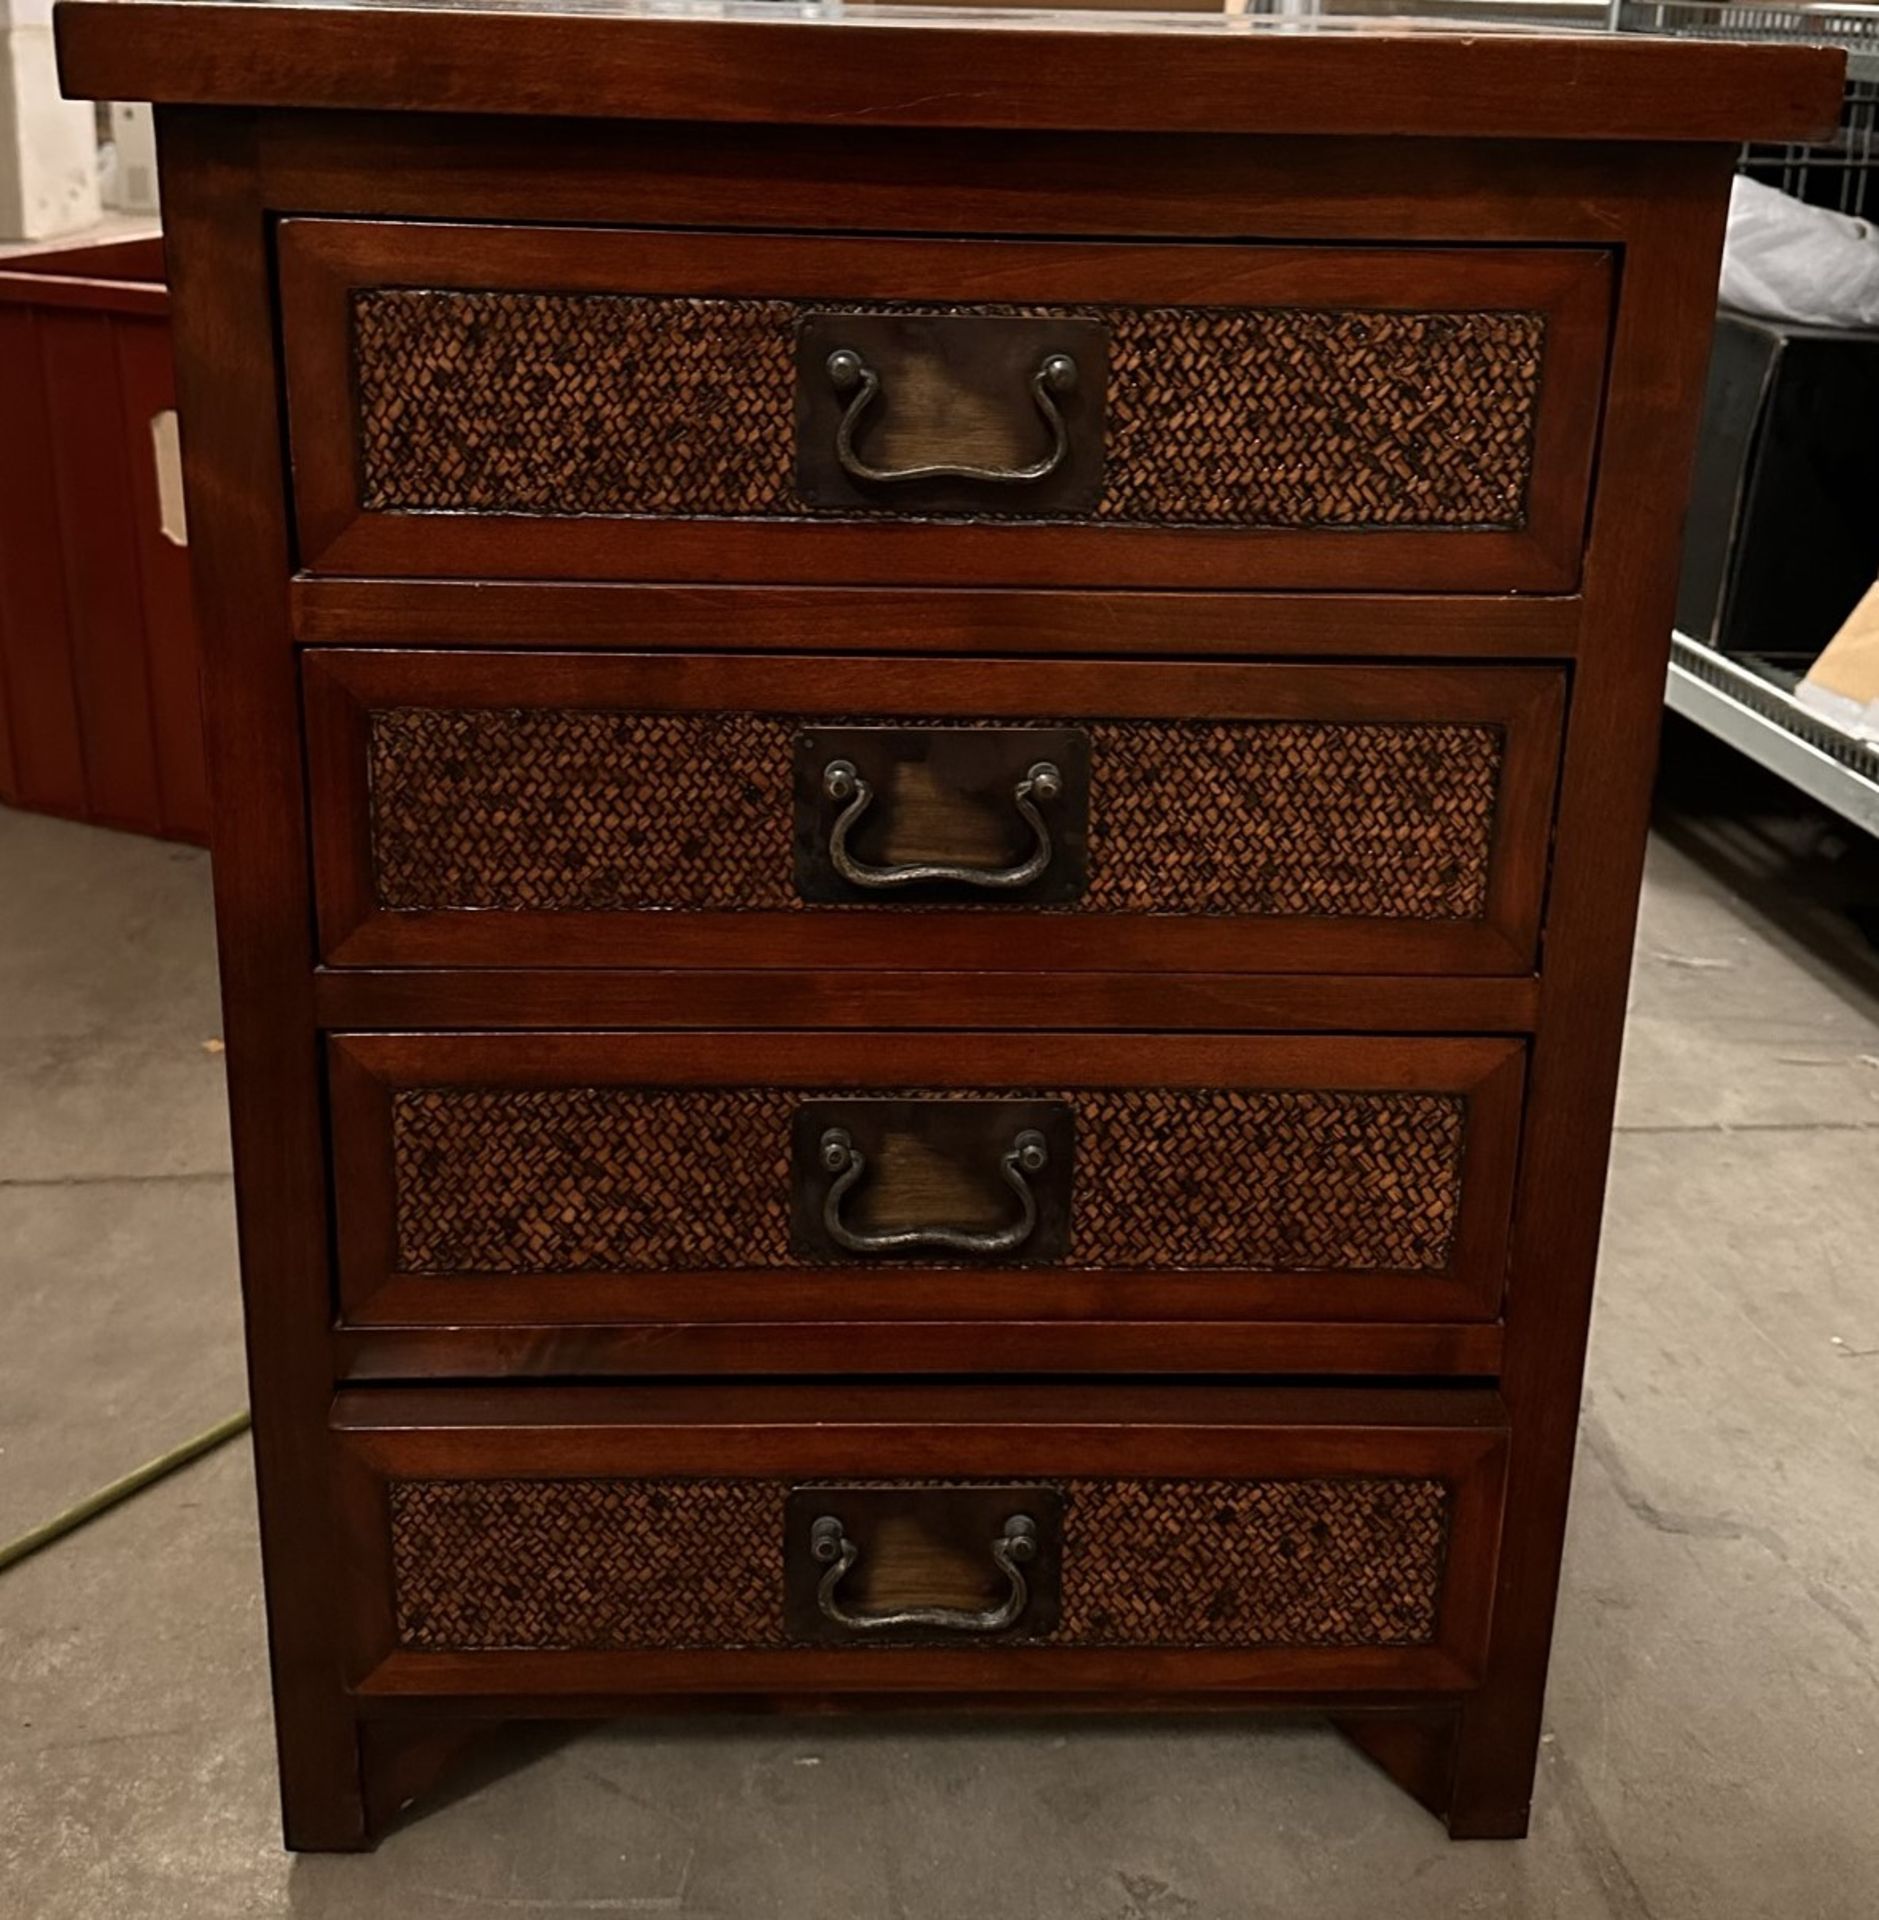 2 x SOLID Dark Wood Set Of Bedside Drawers With Bronze Catches And Rattan Detail  - From An Upmarket